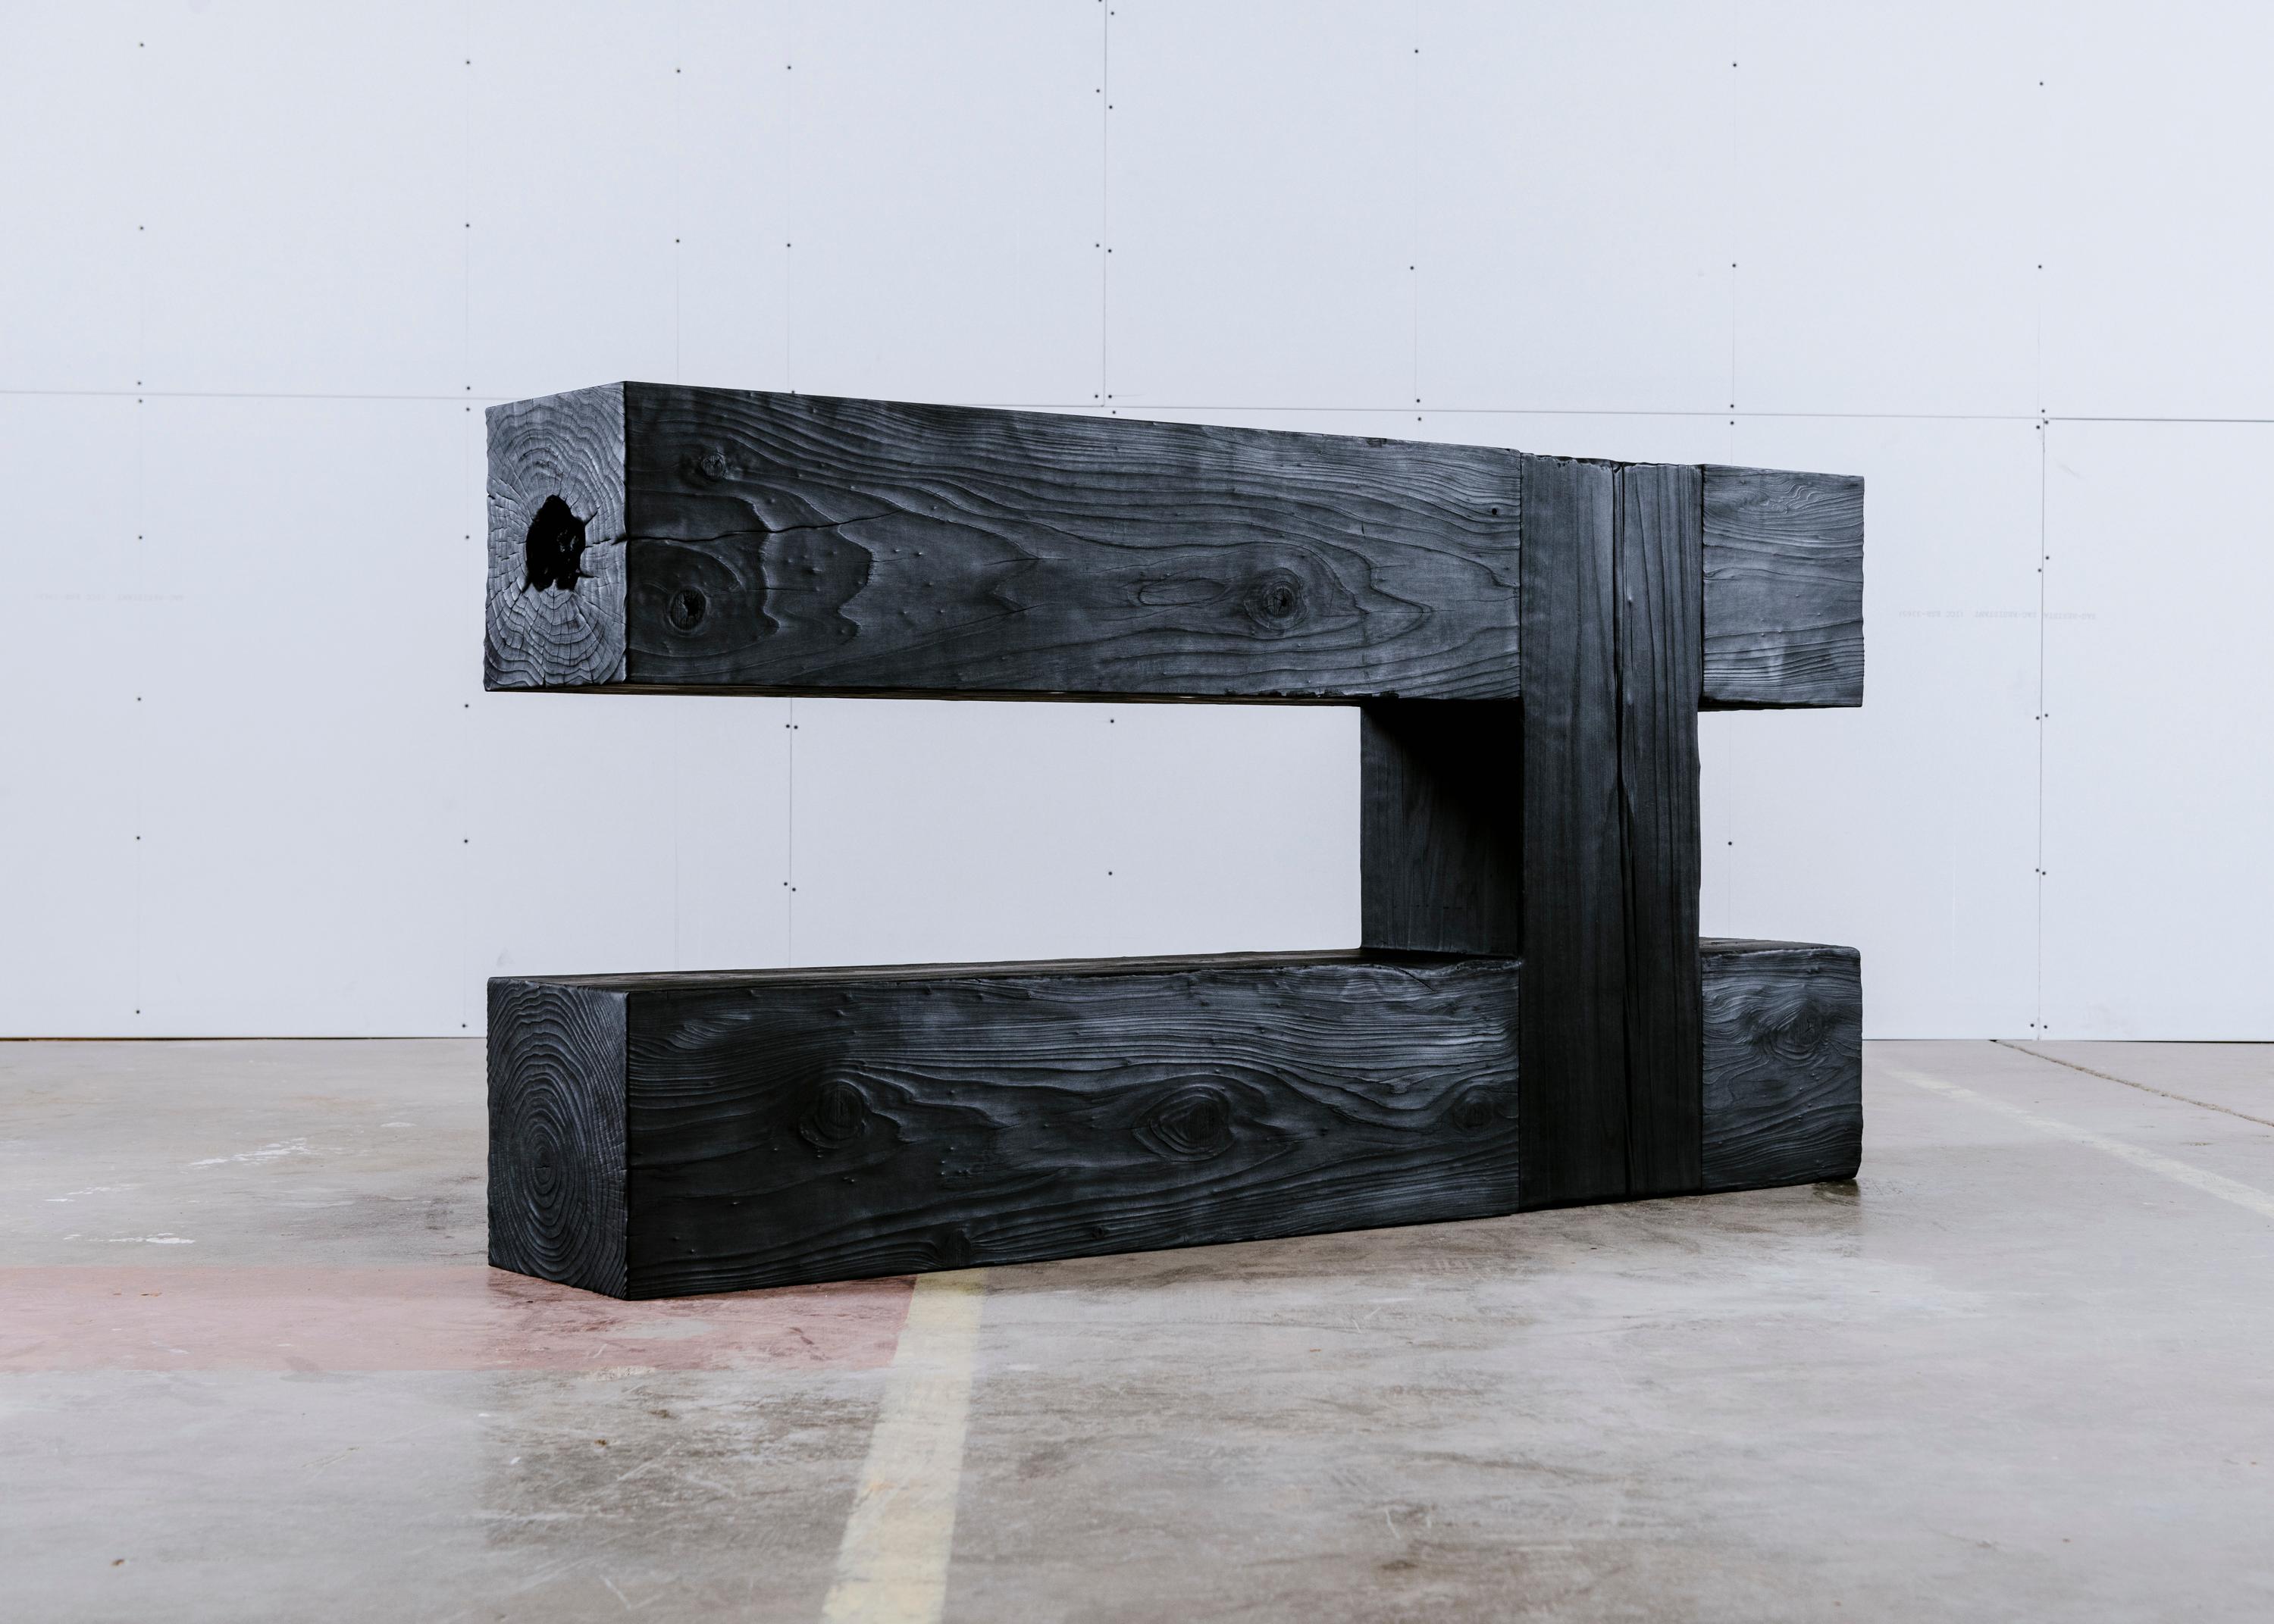 Wanagi Komi is one of seven unique pieces in an ongoing body of works by Los Angeles furniture practice Base 10. The ‘Kodama’ series comprises large-scale furniture works constructed of salvaged California Redwood and composed using the principles,